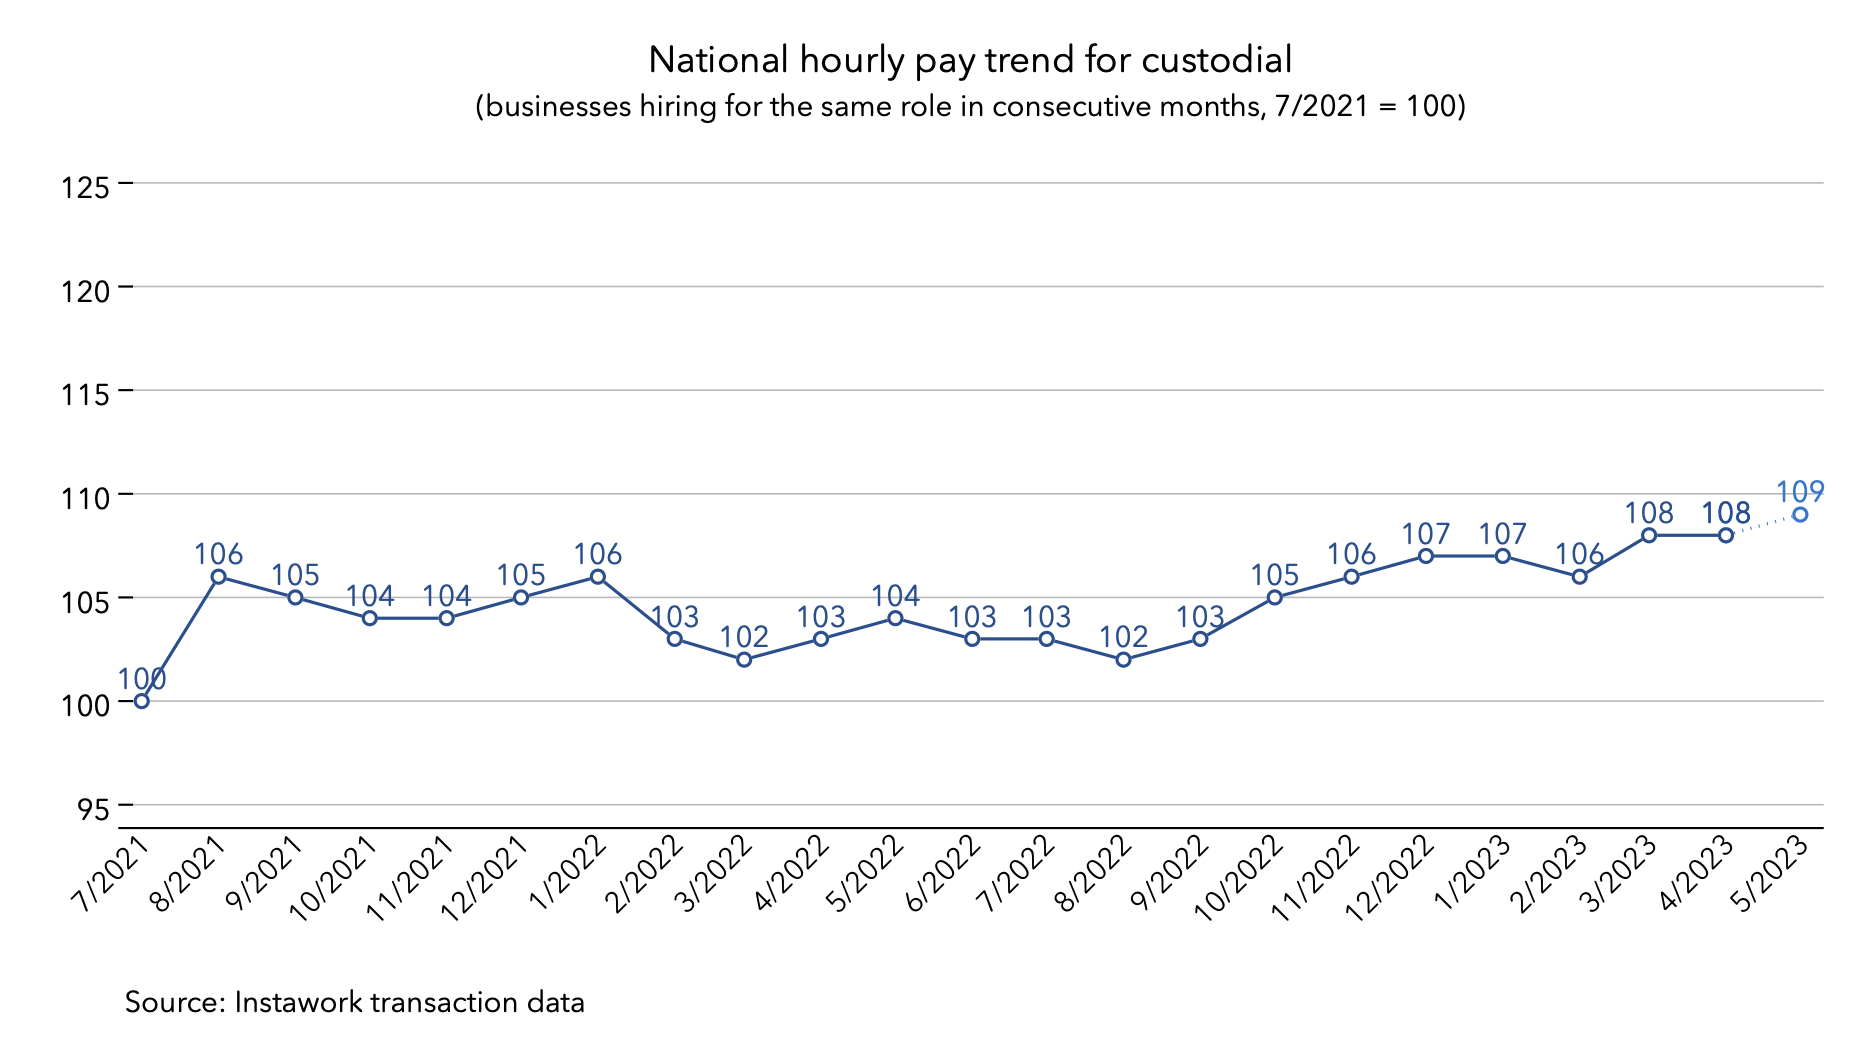 1 May 2023 pay trend for custodial